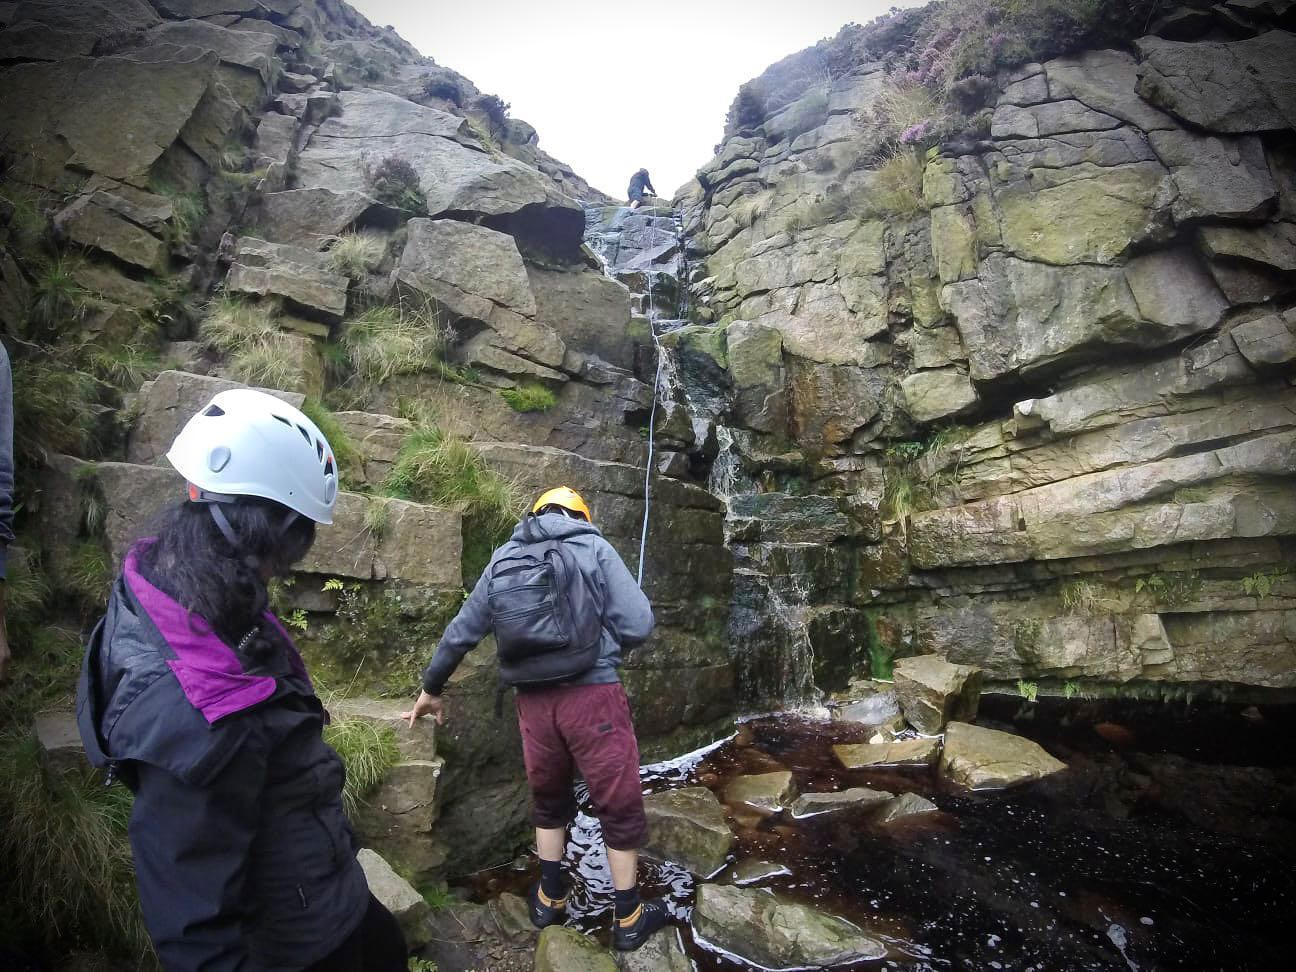 On our Mountain Adventure Scrambles we'll stay off the beaten track, making sure to find the most exciting way up the hill we can find, be that following streams or climbing rocky outcrops, and stopping to explore all the caves, tunnels and interesting things we can find. 

For booking and more information - https://www.wilderness-development.com/walks-and-scrambles/mountain-adventure-scramble ⛰🥾⛰ 
.
.
.
#wildernessdevelopment #smallbusiness #scrambling #adventures #trysomethingnew #peakdistrict #kinderscout #peakdistrictnationalpark #peakdistrictclimbing #mountainsfellsandhikes #roamtheuk #outdoorpursuits #outdooradventures #outdooractivities #nationalparksuk #booknow